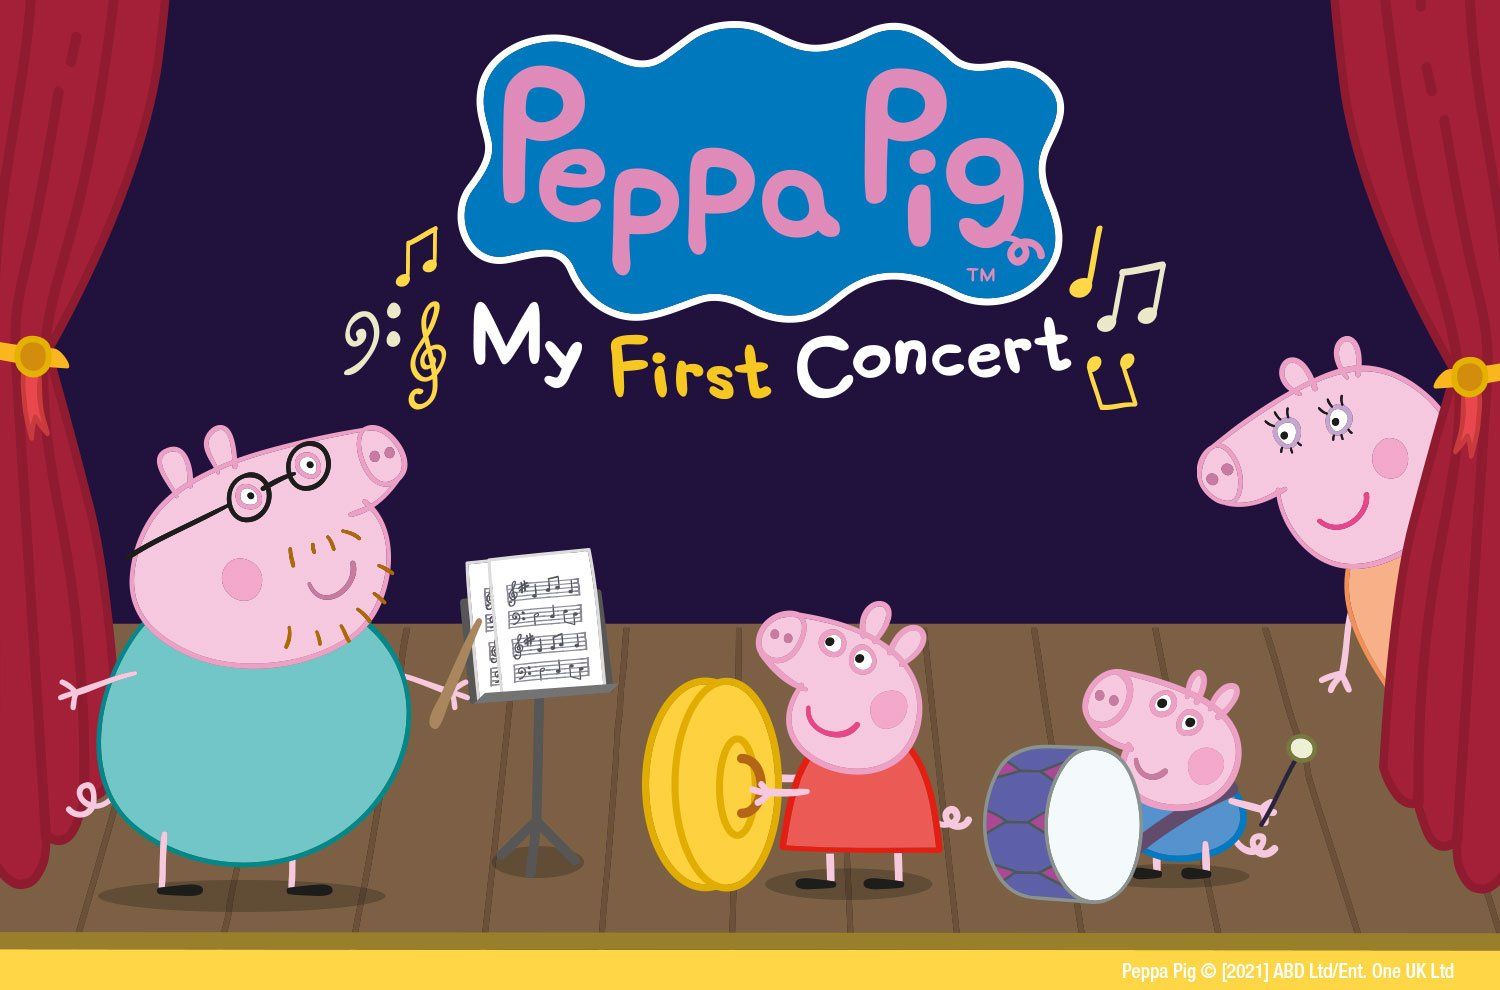 This show is perfect for children as the little piggies can join in with the characters. Buy 'Peppa Pig: My First Concert' tickets.